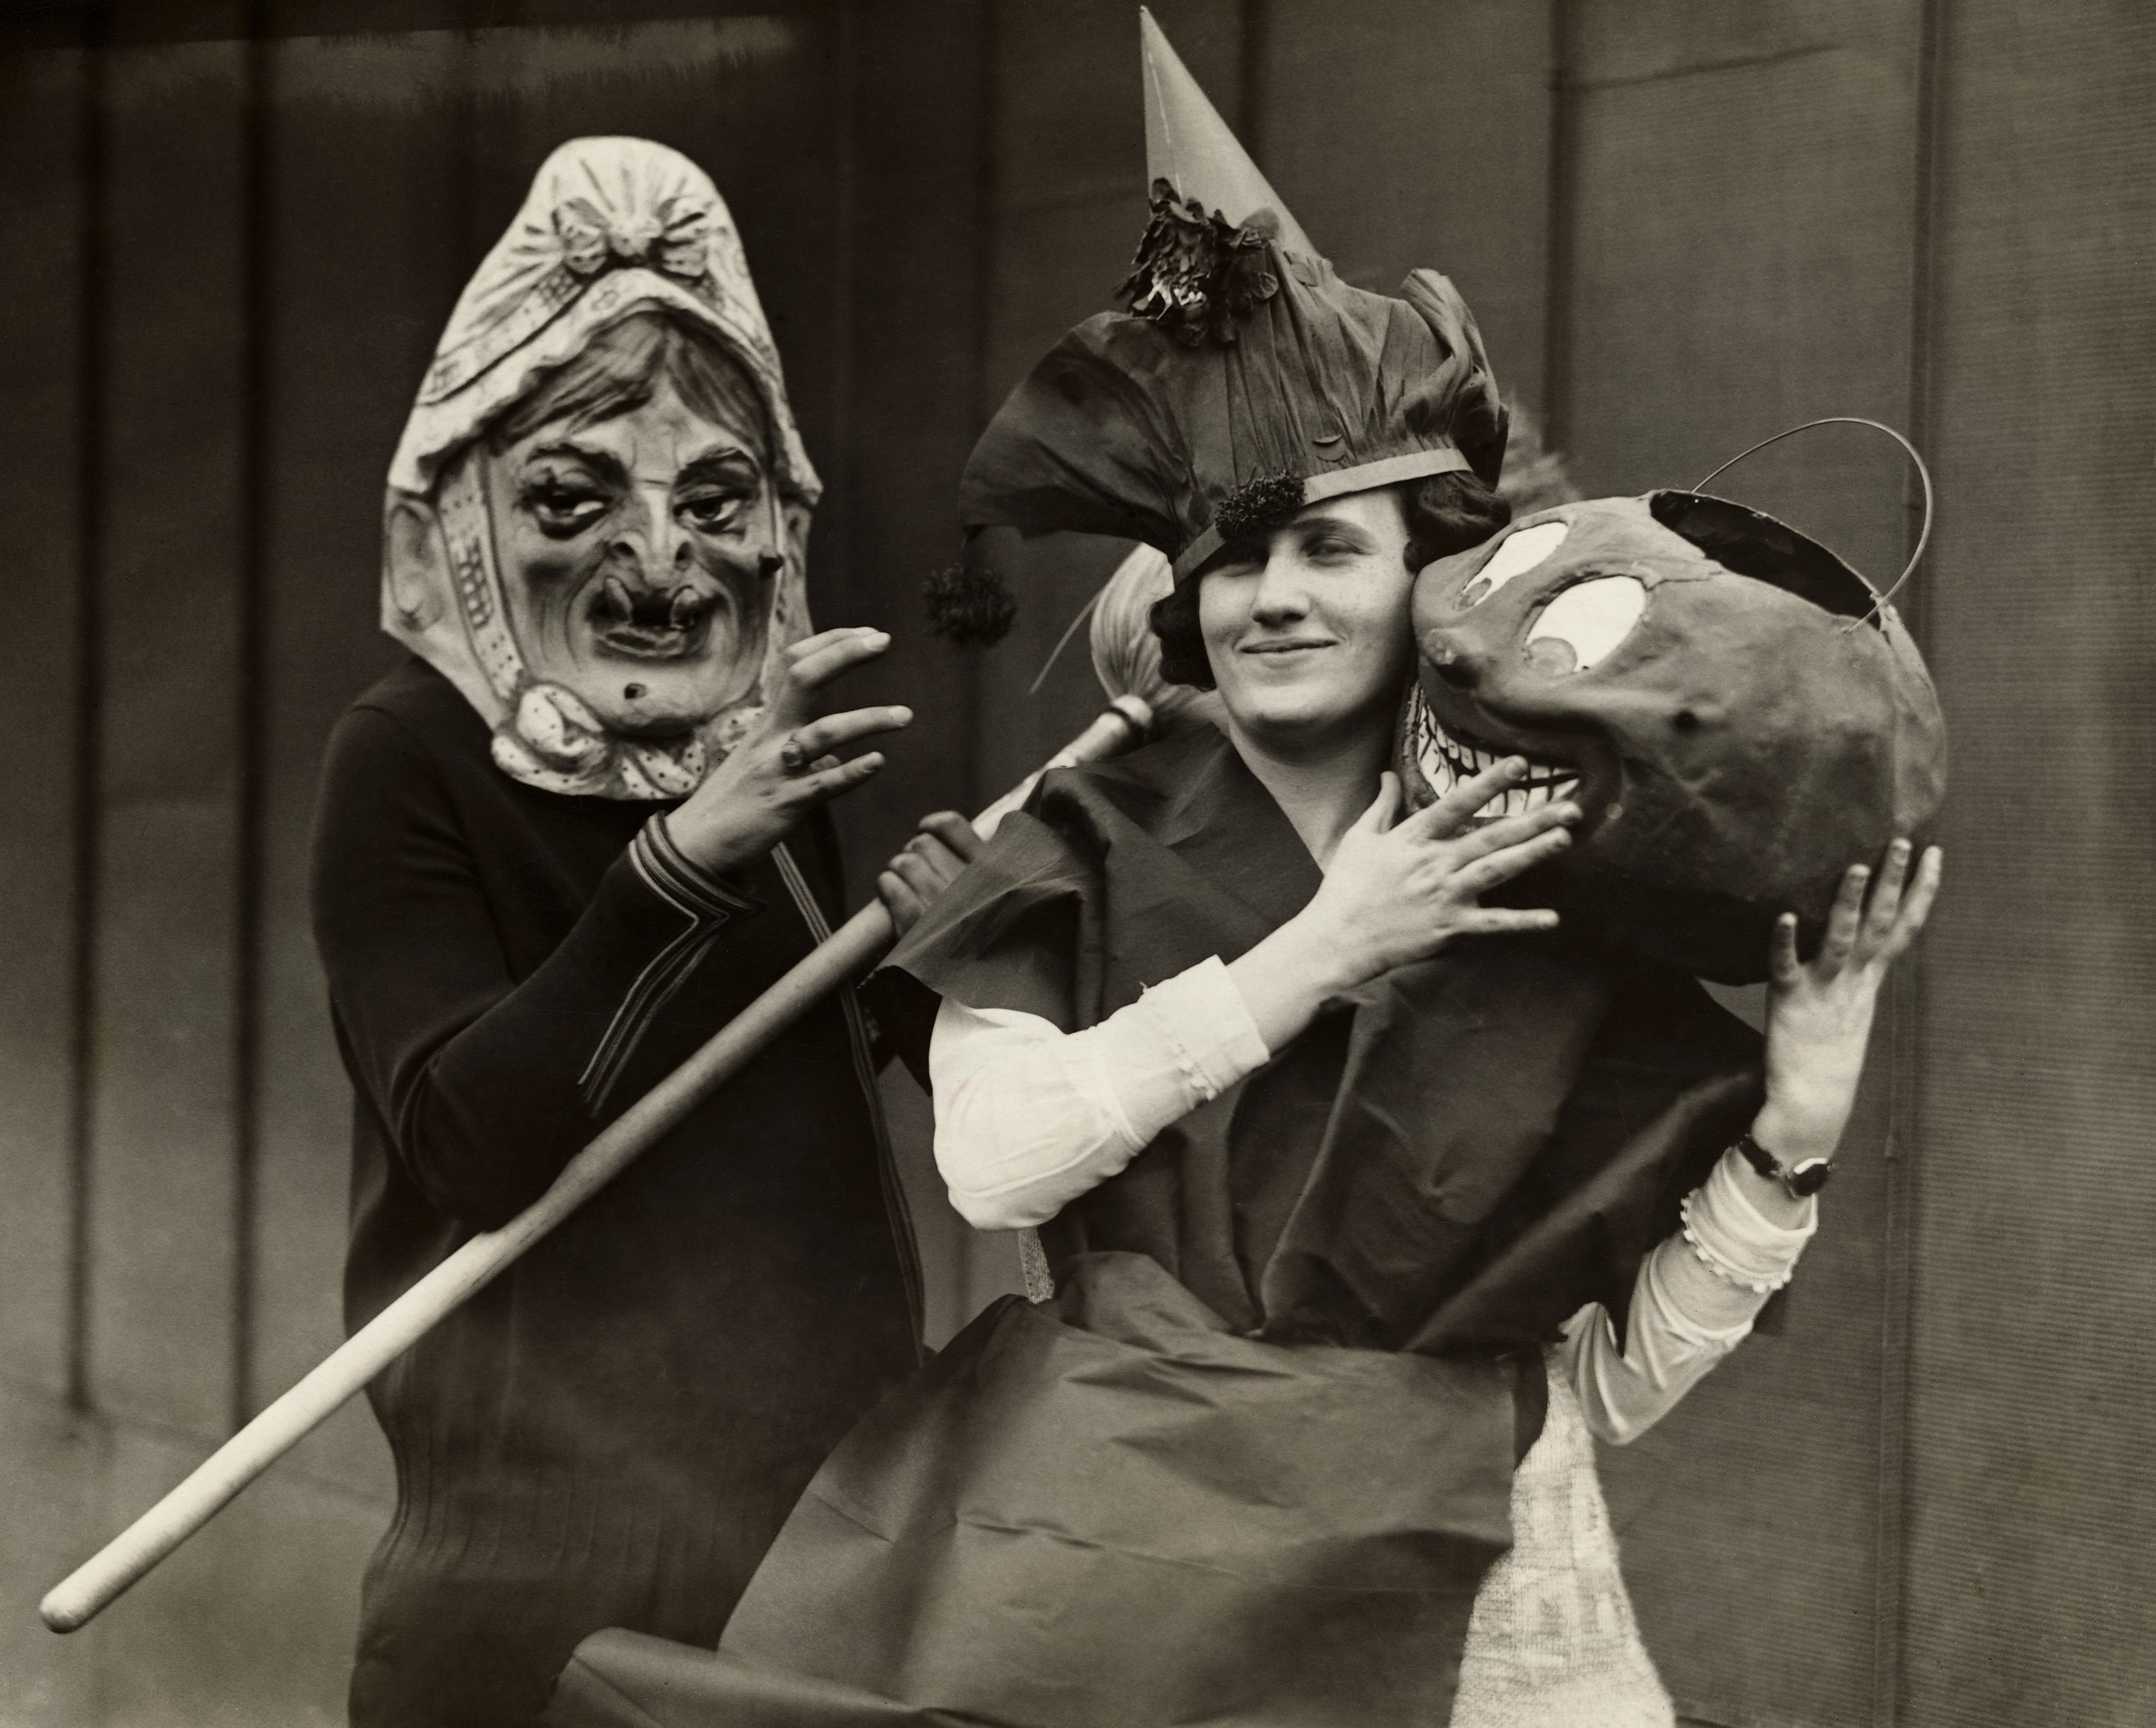 The history of Halloween costumes